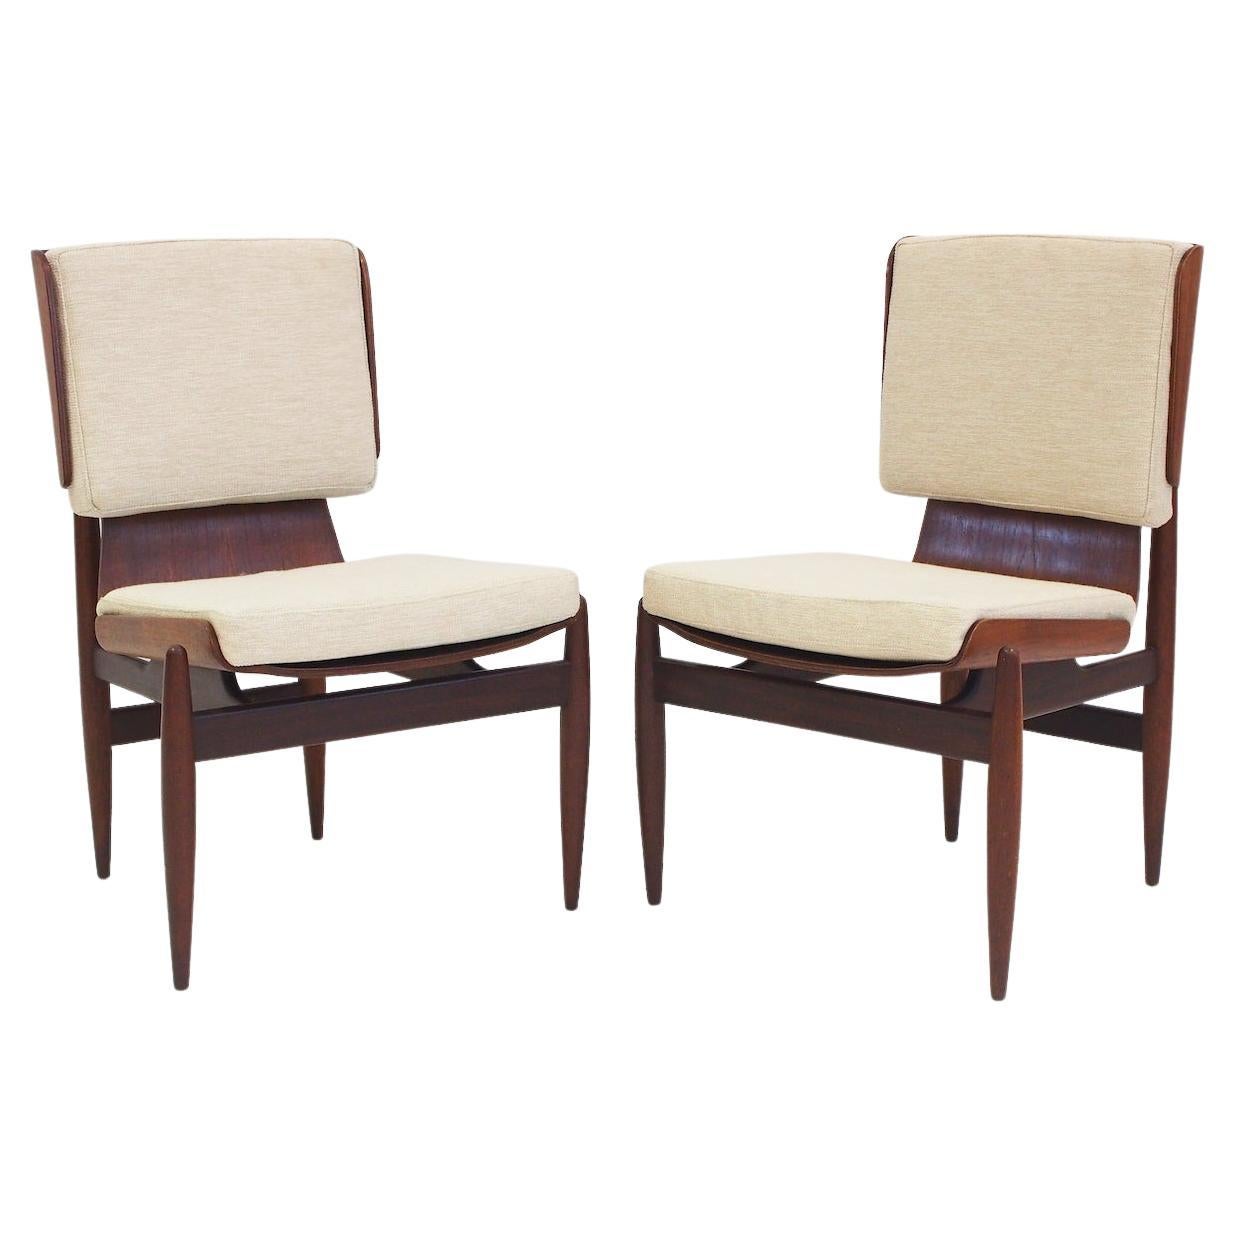 Pair of Italian Modernist Wooden Side Chairs by Barovero For Sale